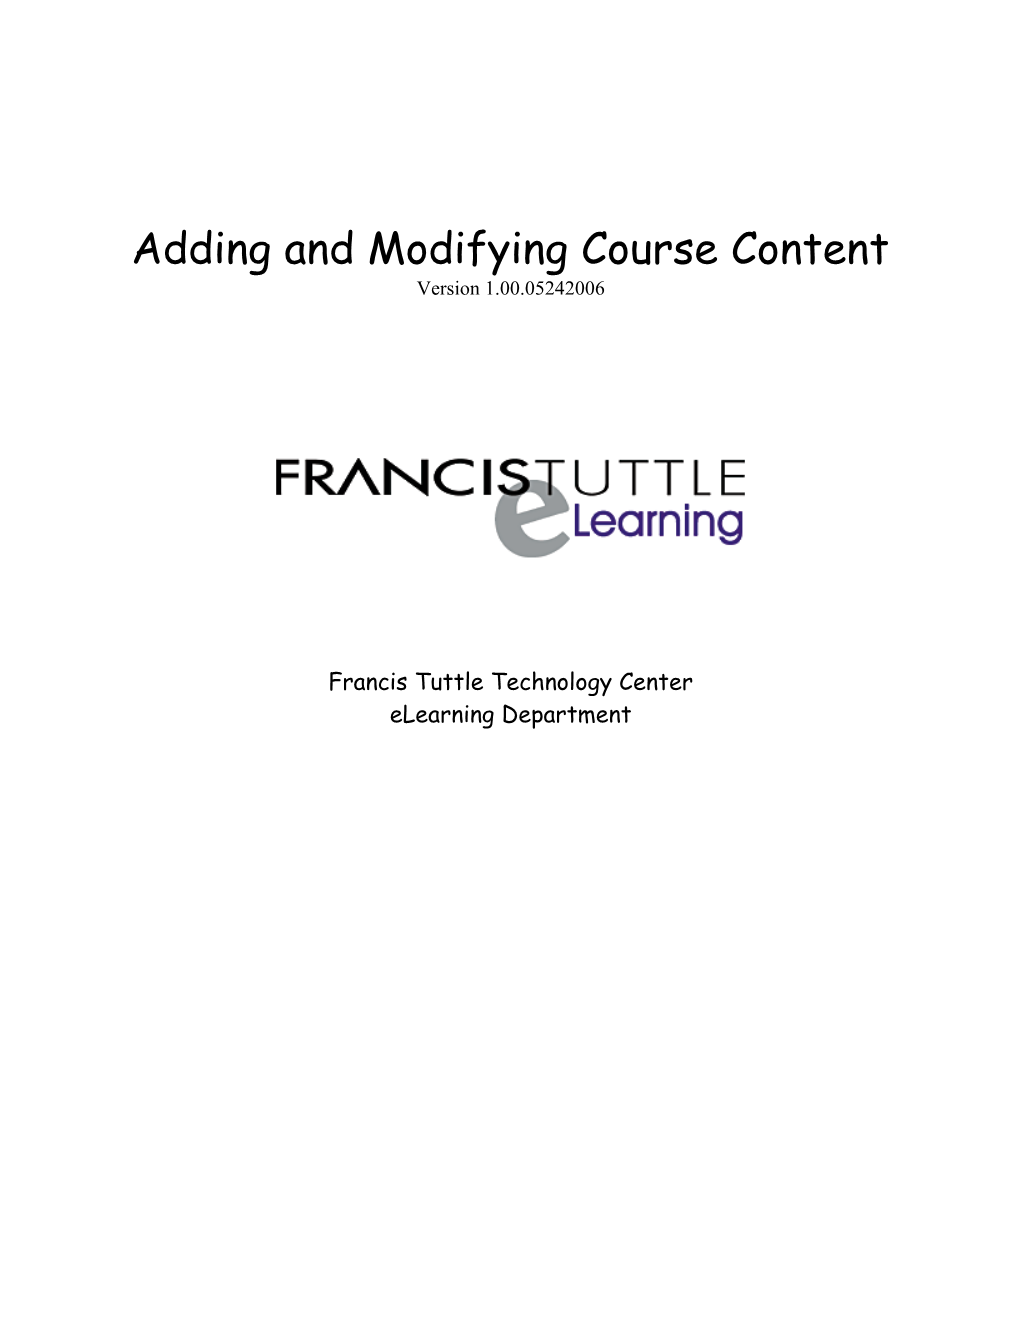 Adding and Modifying Course Content